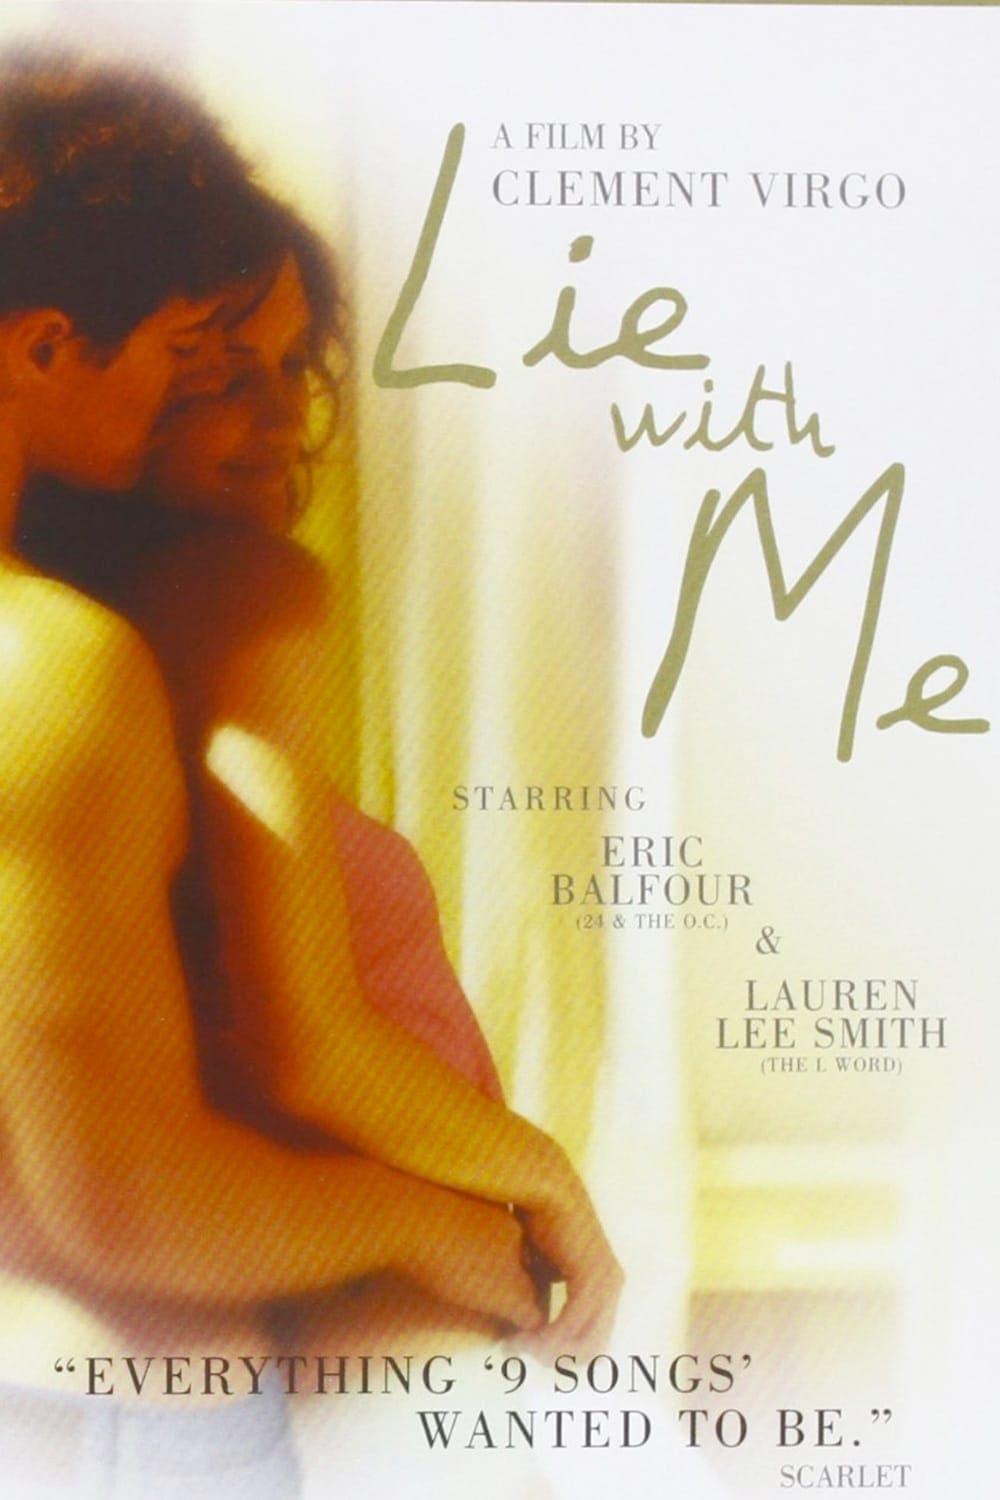 Lie with Me poster